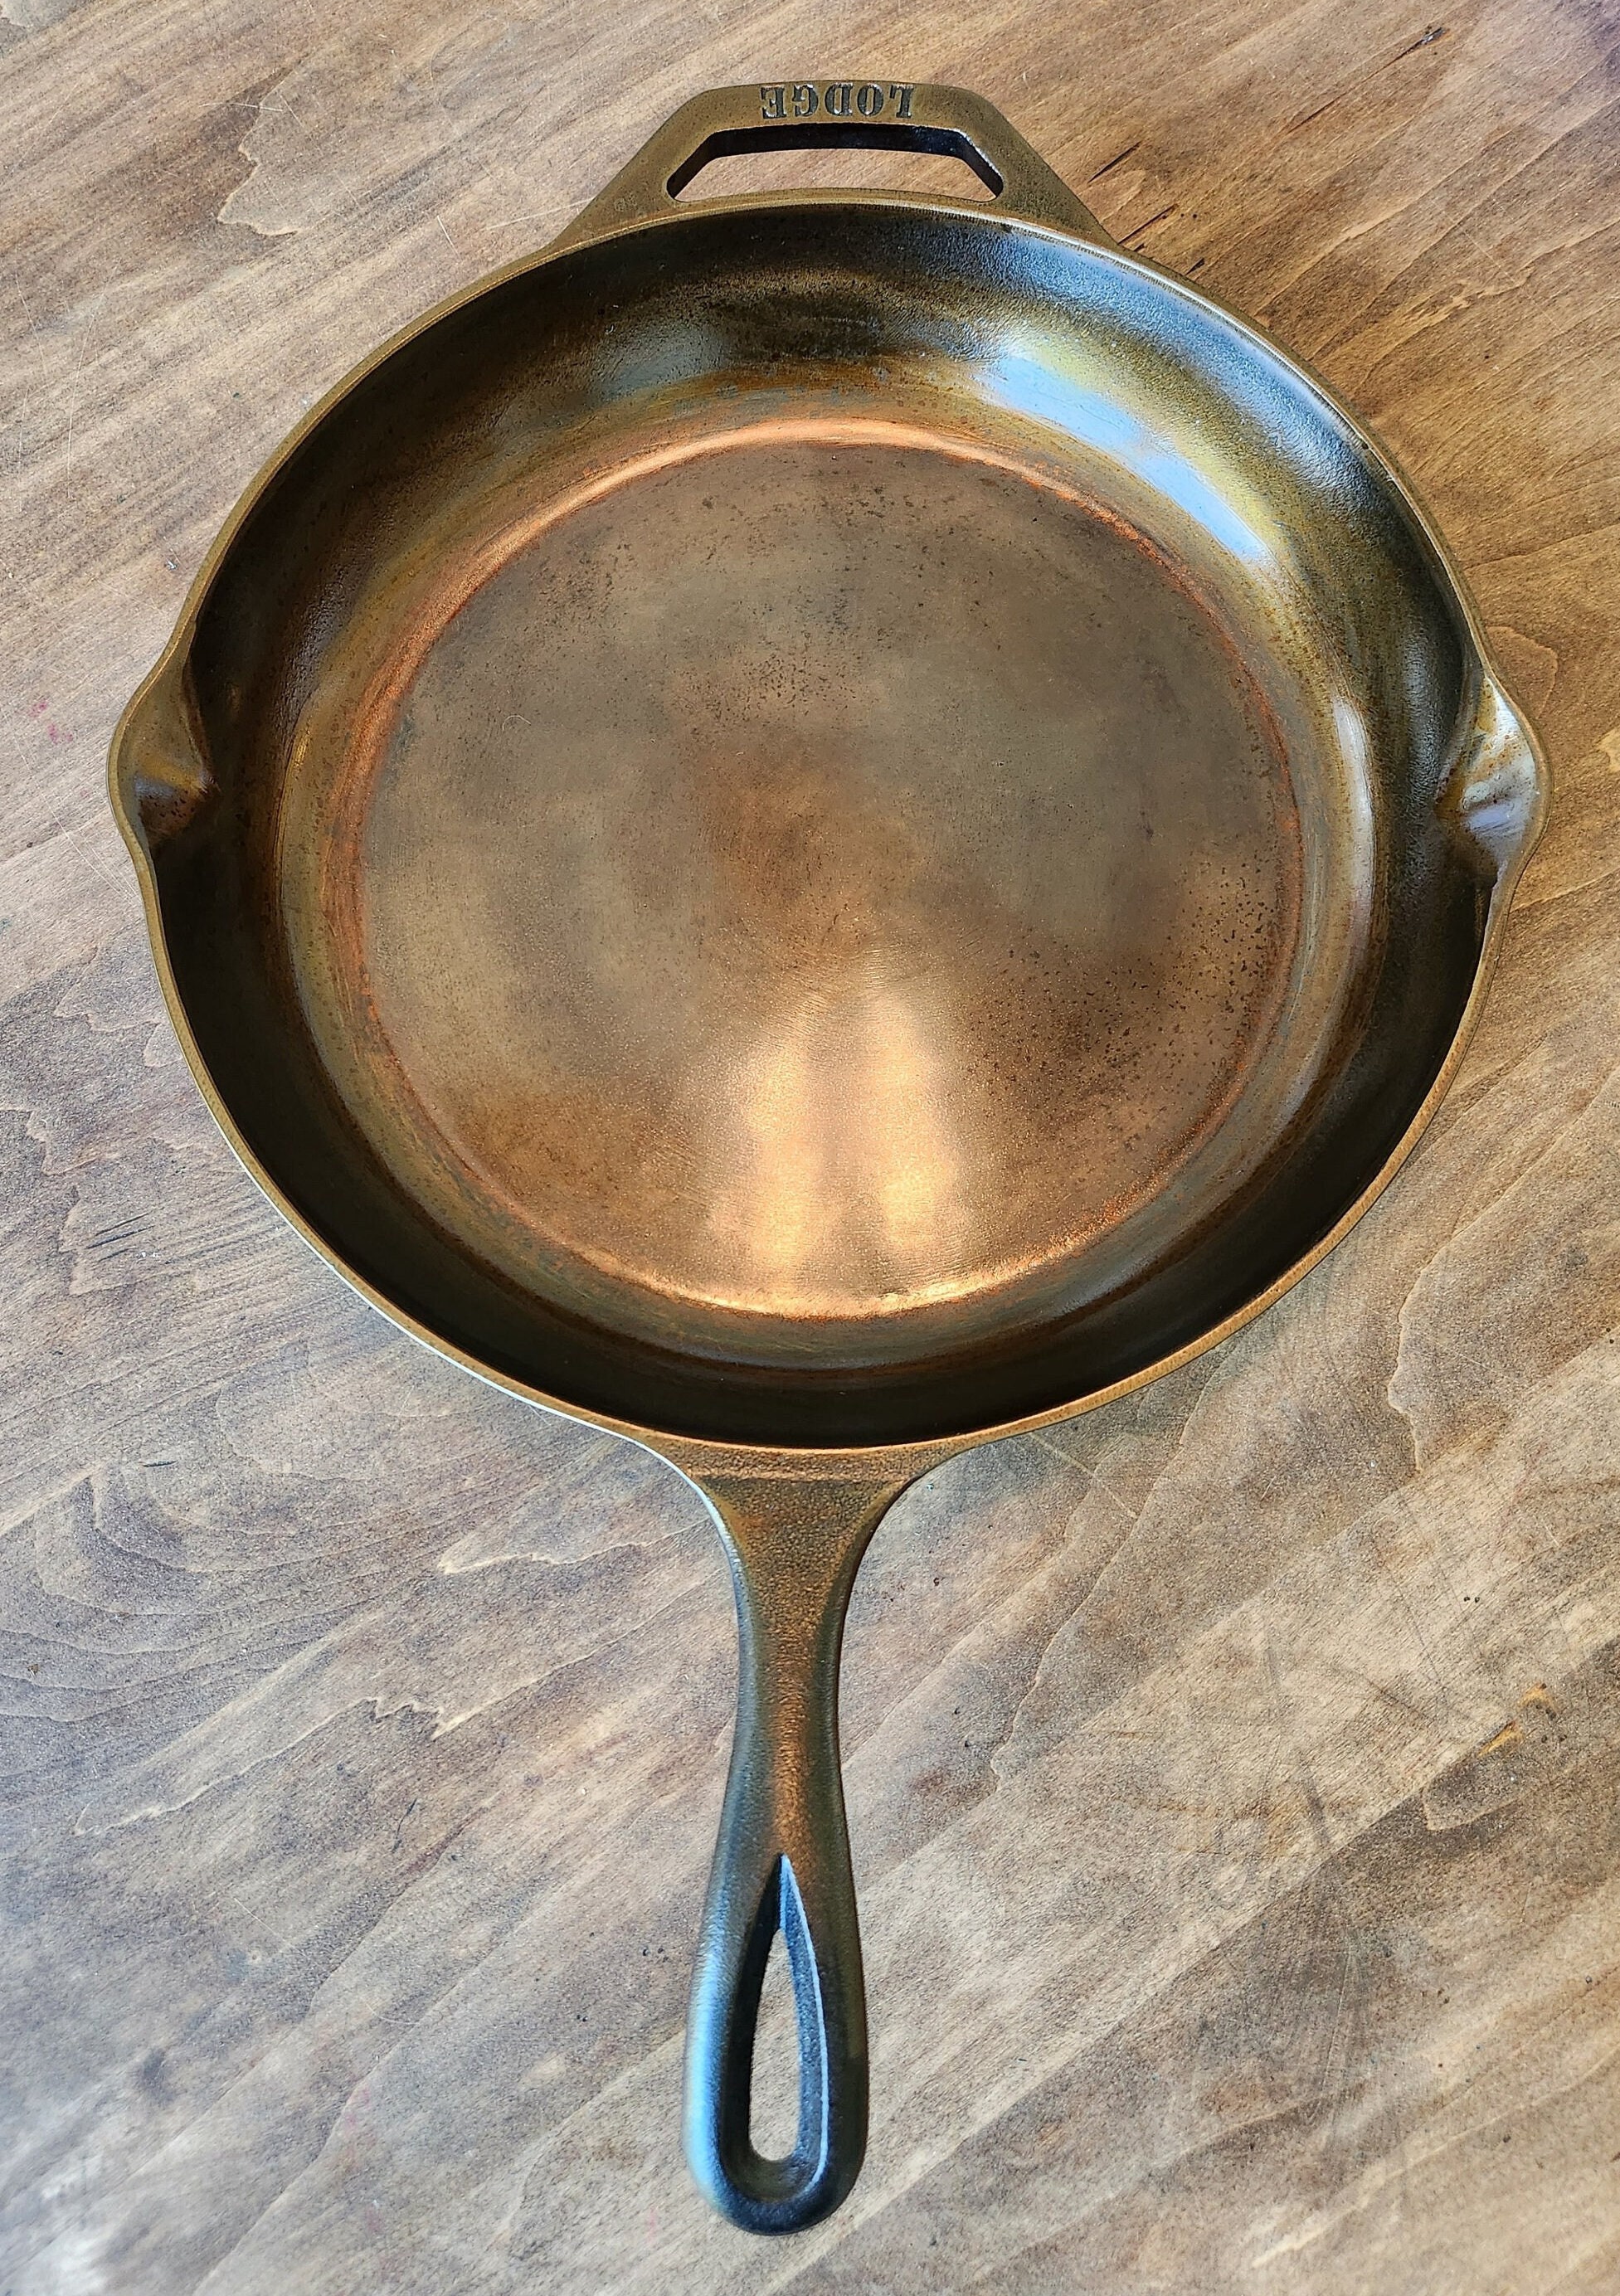 I just got my Smithey Ironware NO 12 cast iron in the mail. Beautiful. :  r/castiron